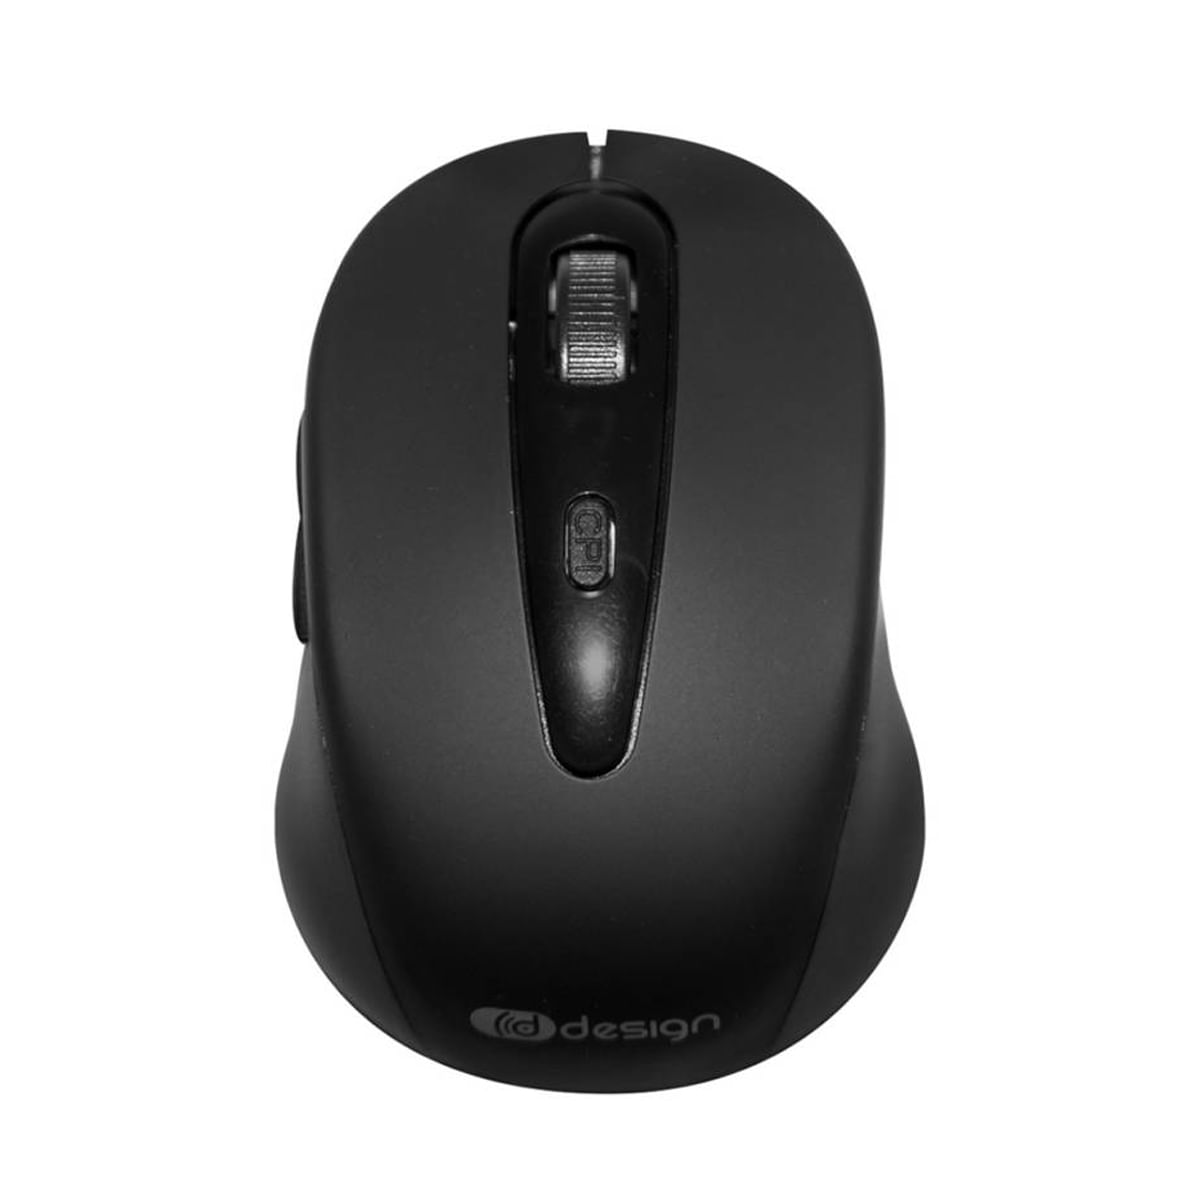 Mouse Inalámbrico Ddesign DD-FREEMOUSE10 1000 DPI